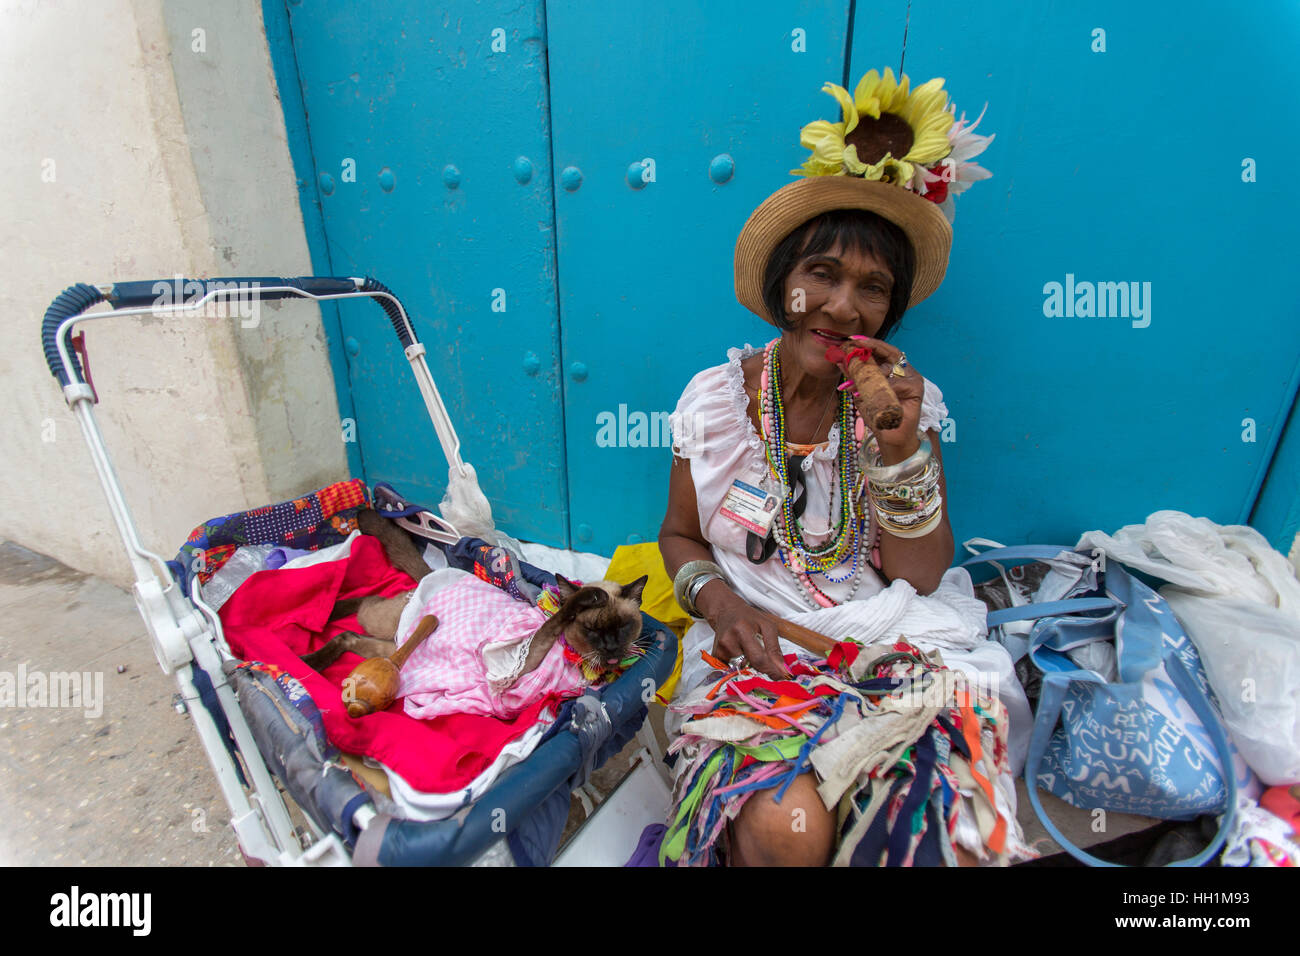 Cuban woman with Siamese cat in stroller in Old Havana Stock Photo